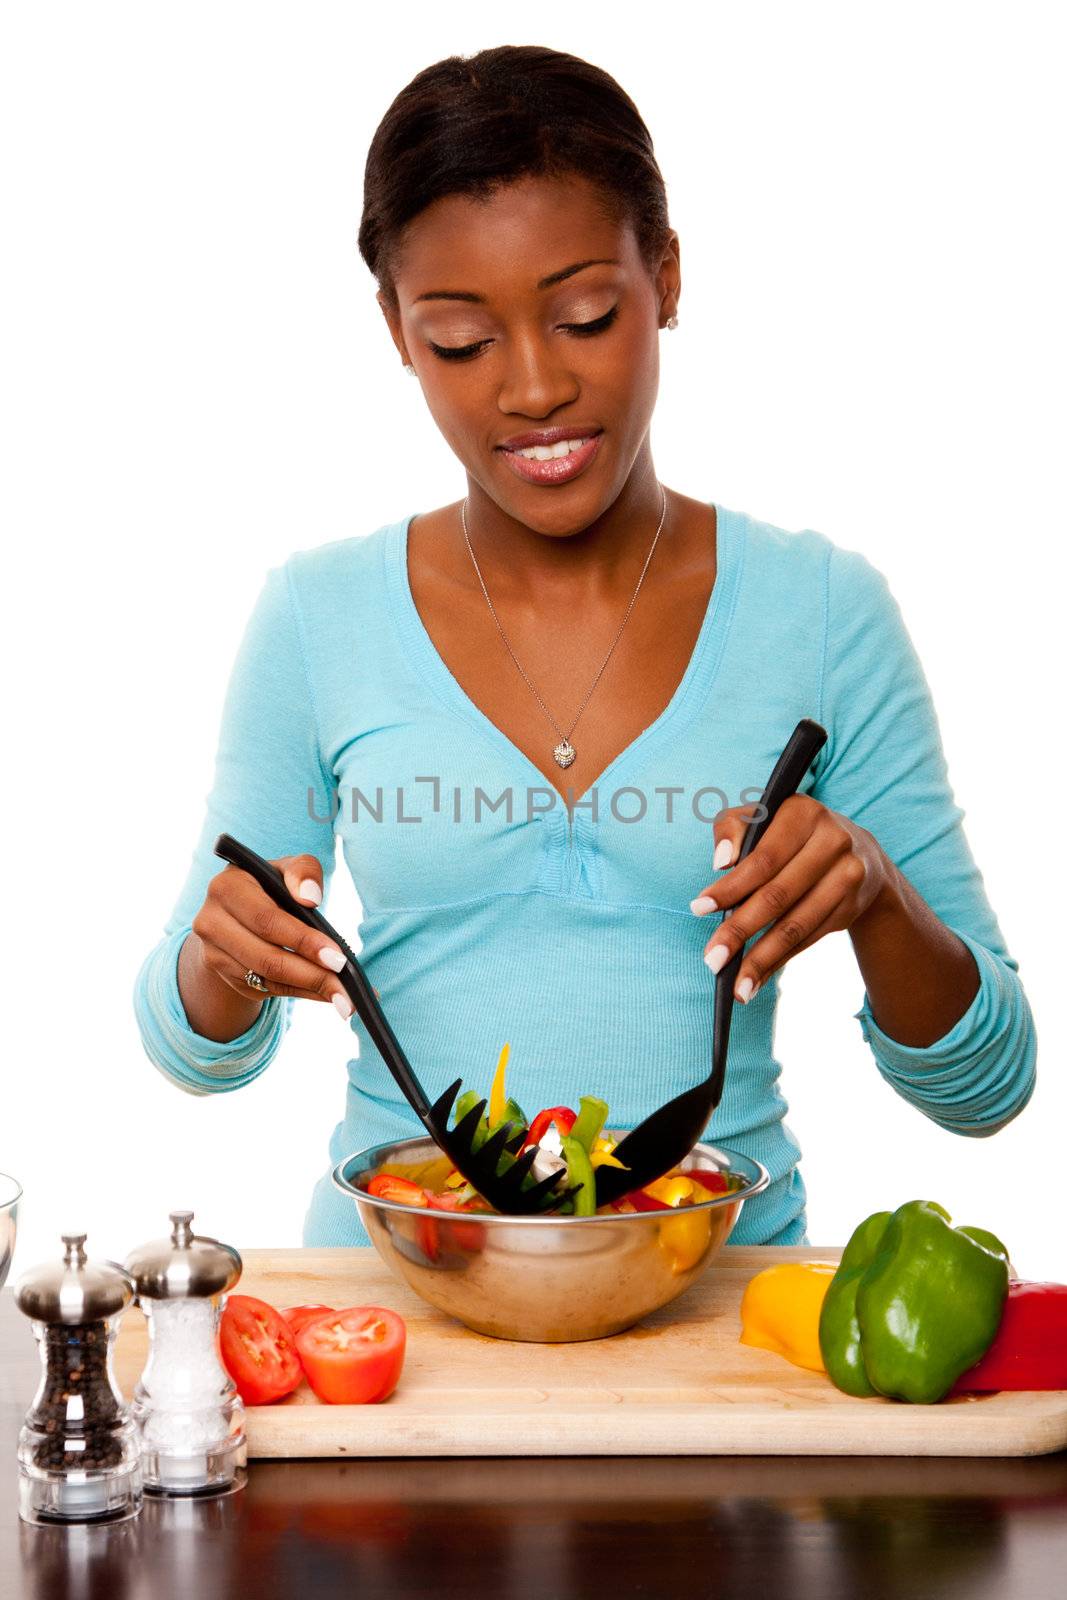 Beautiful health conscious young woman tossing healthy organic salad in kitchen, isolated.